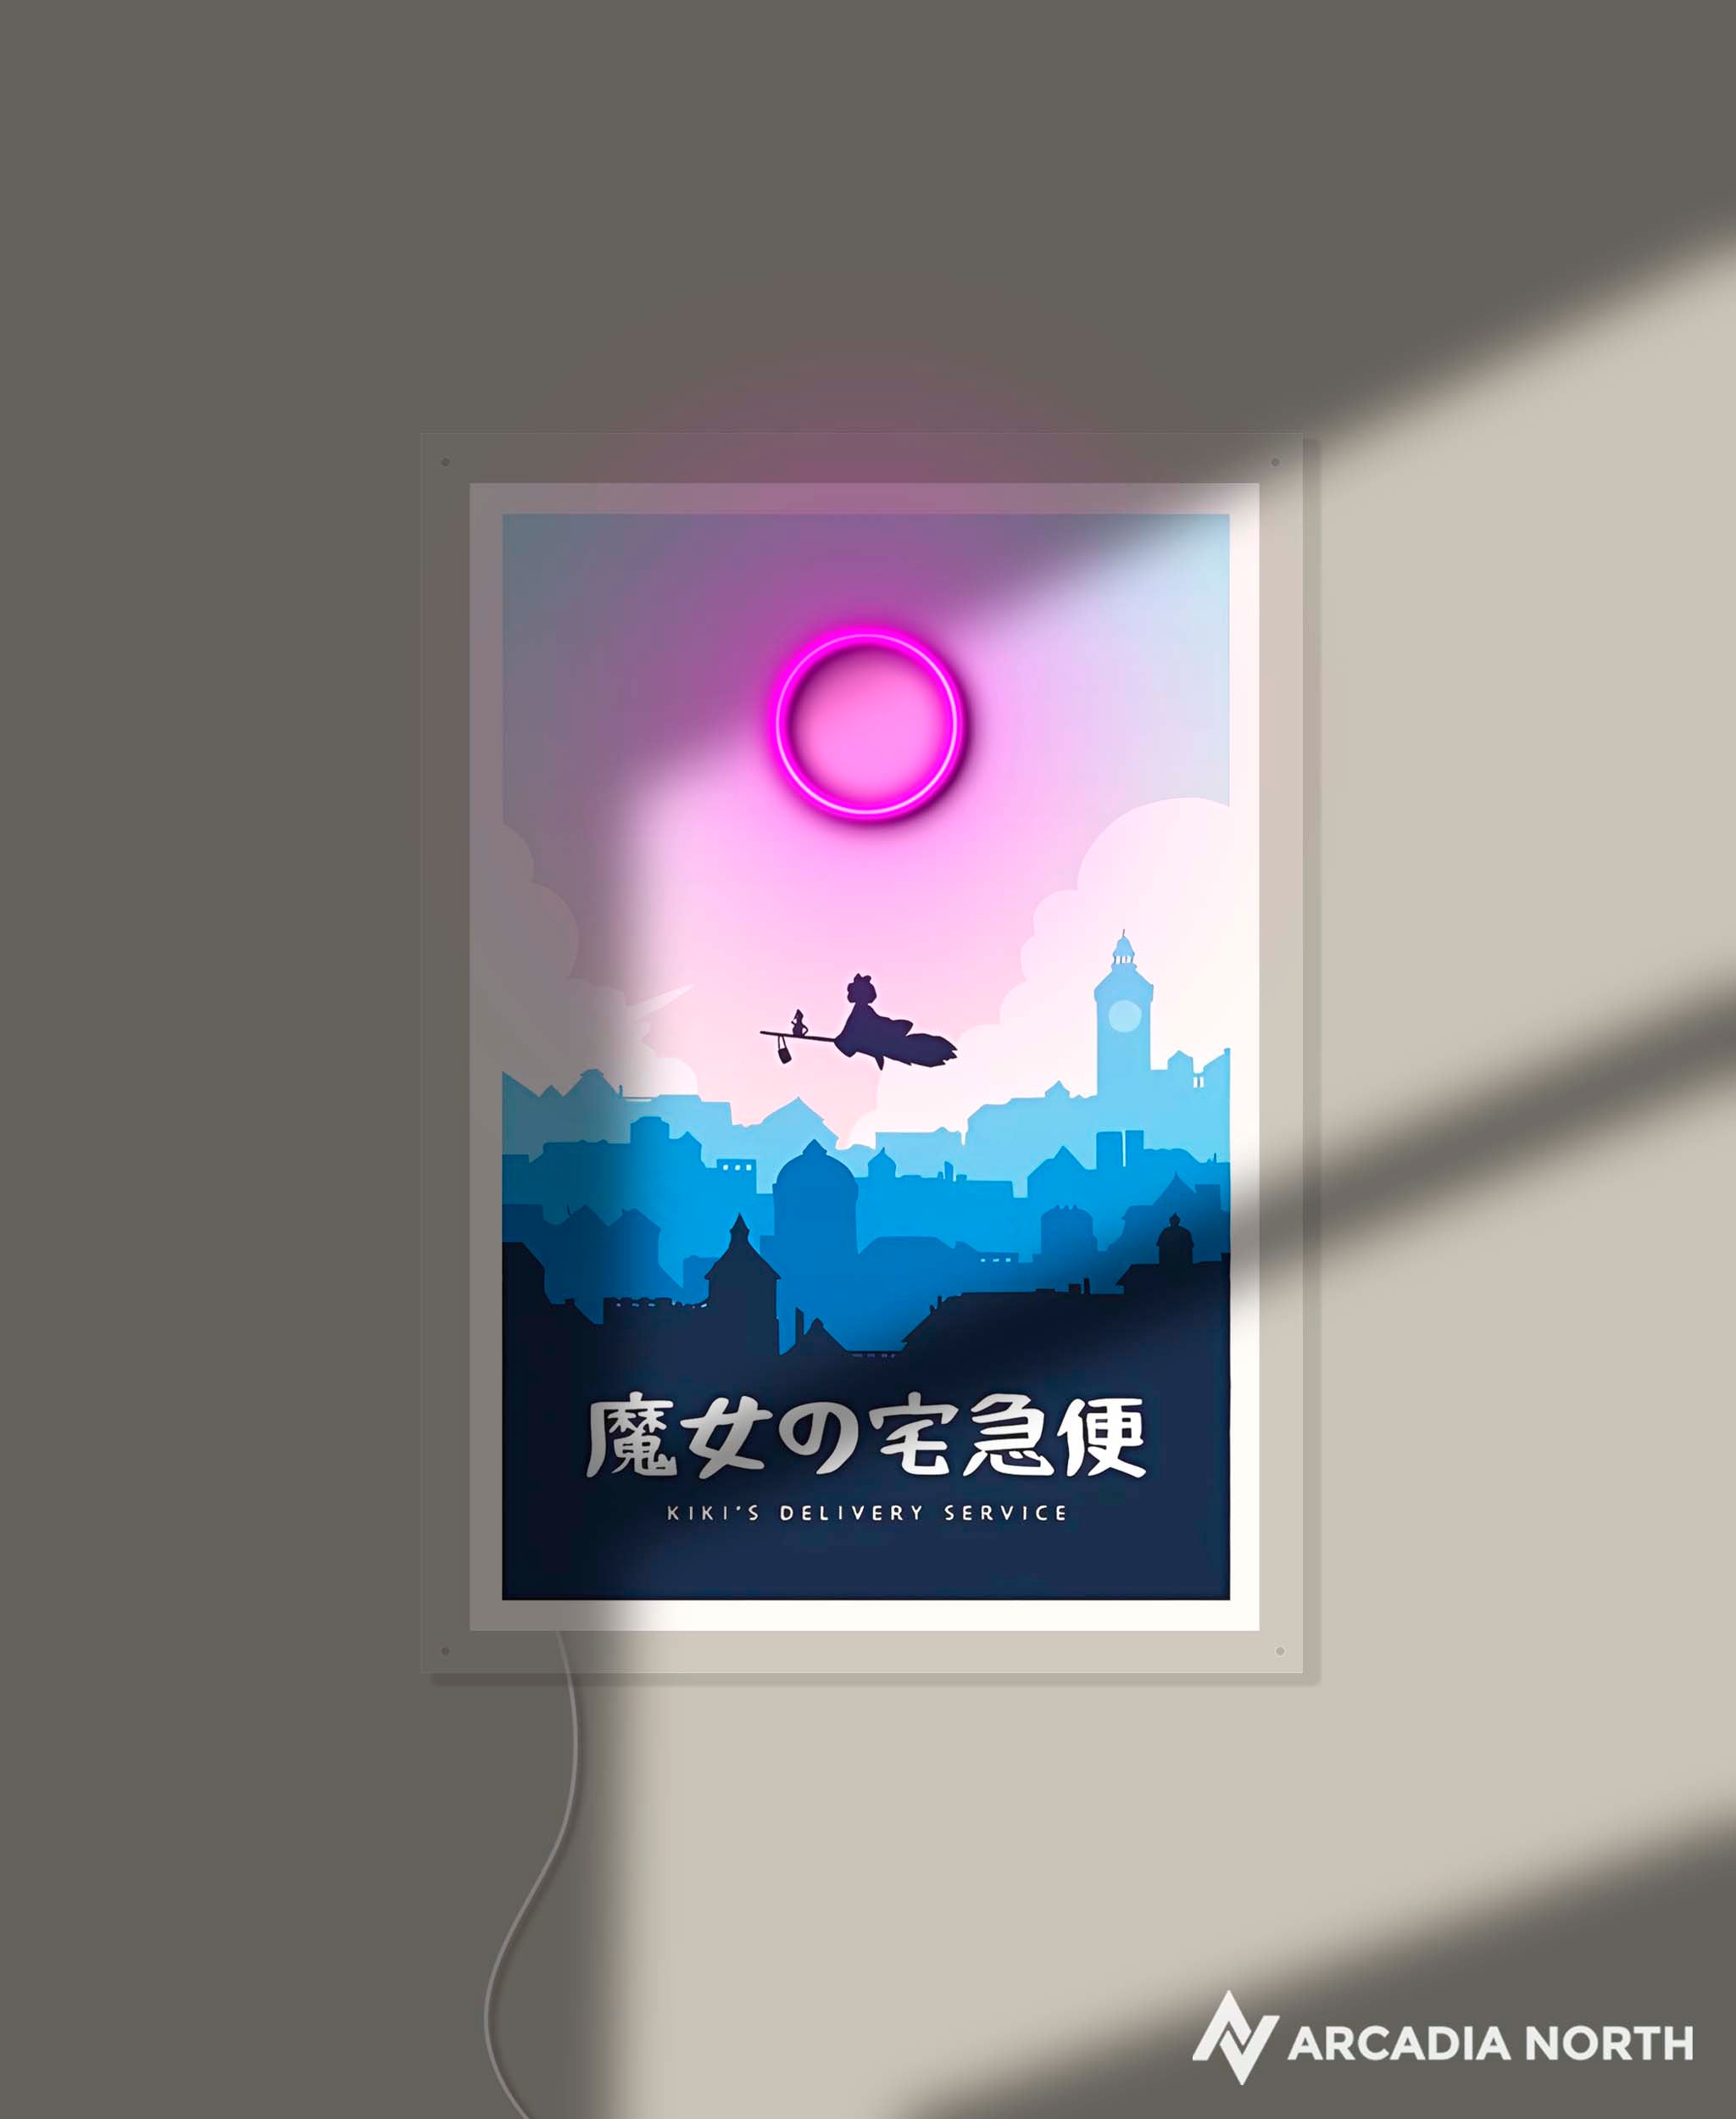 Arcadia North AURALIGHT Original LED Poster featuring the Studio Ghibli anime Kiki's Delivery Service in minimalistic style. Illuminated by glowing neon LED lights. UV-printed on acrylic.